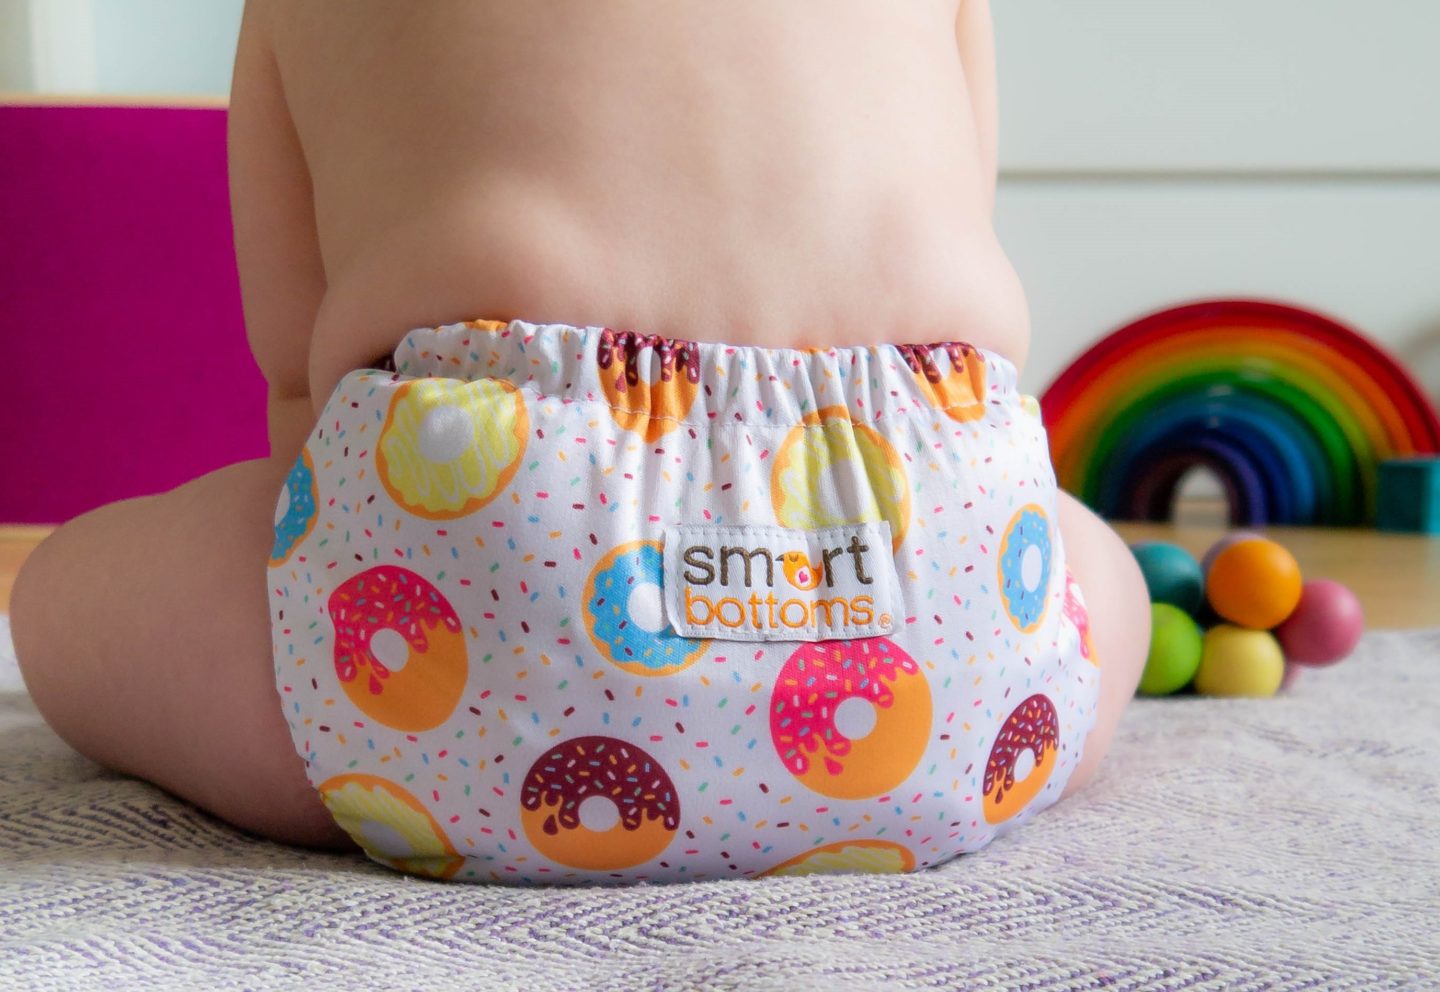 Cloth nappies are a great way to start a zero waste lifestyle.